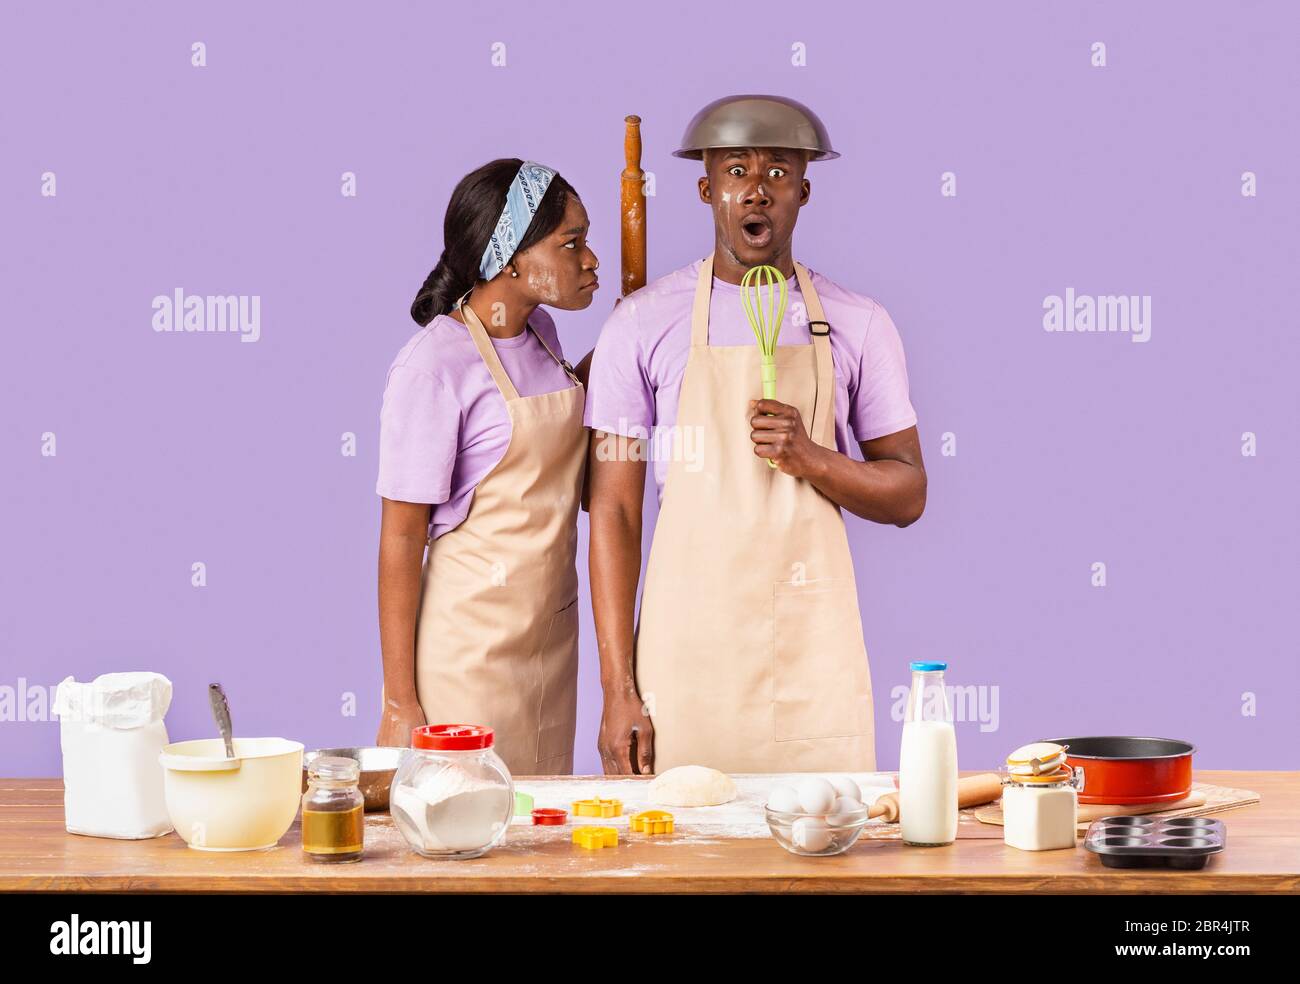 Angry black girl with rolling pin and her frightened boyfriend trying to bake together on color background Stock Photo